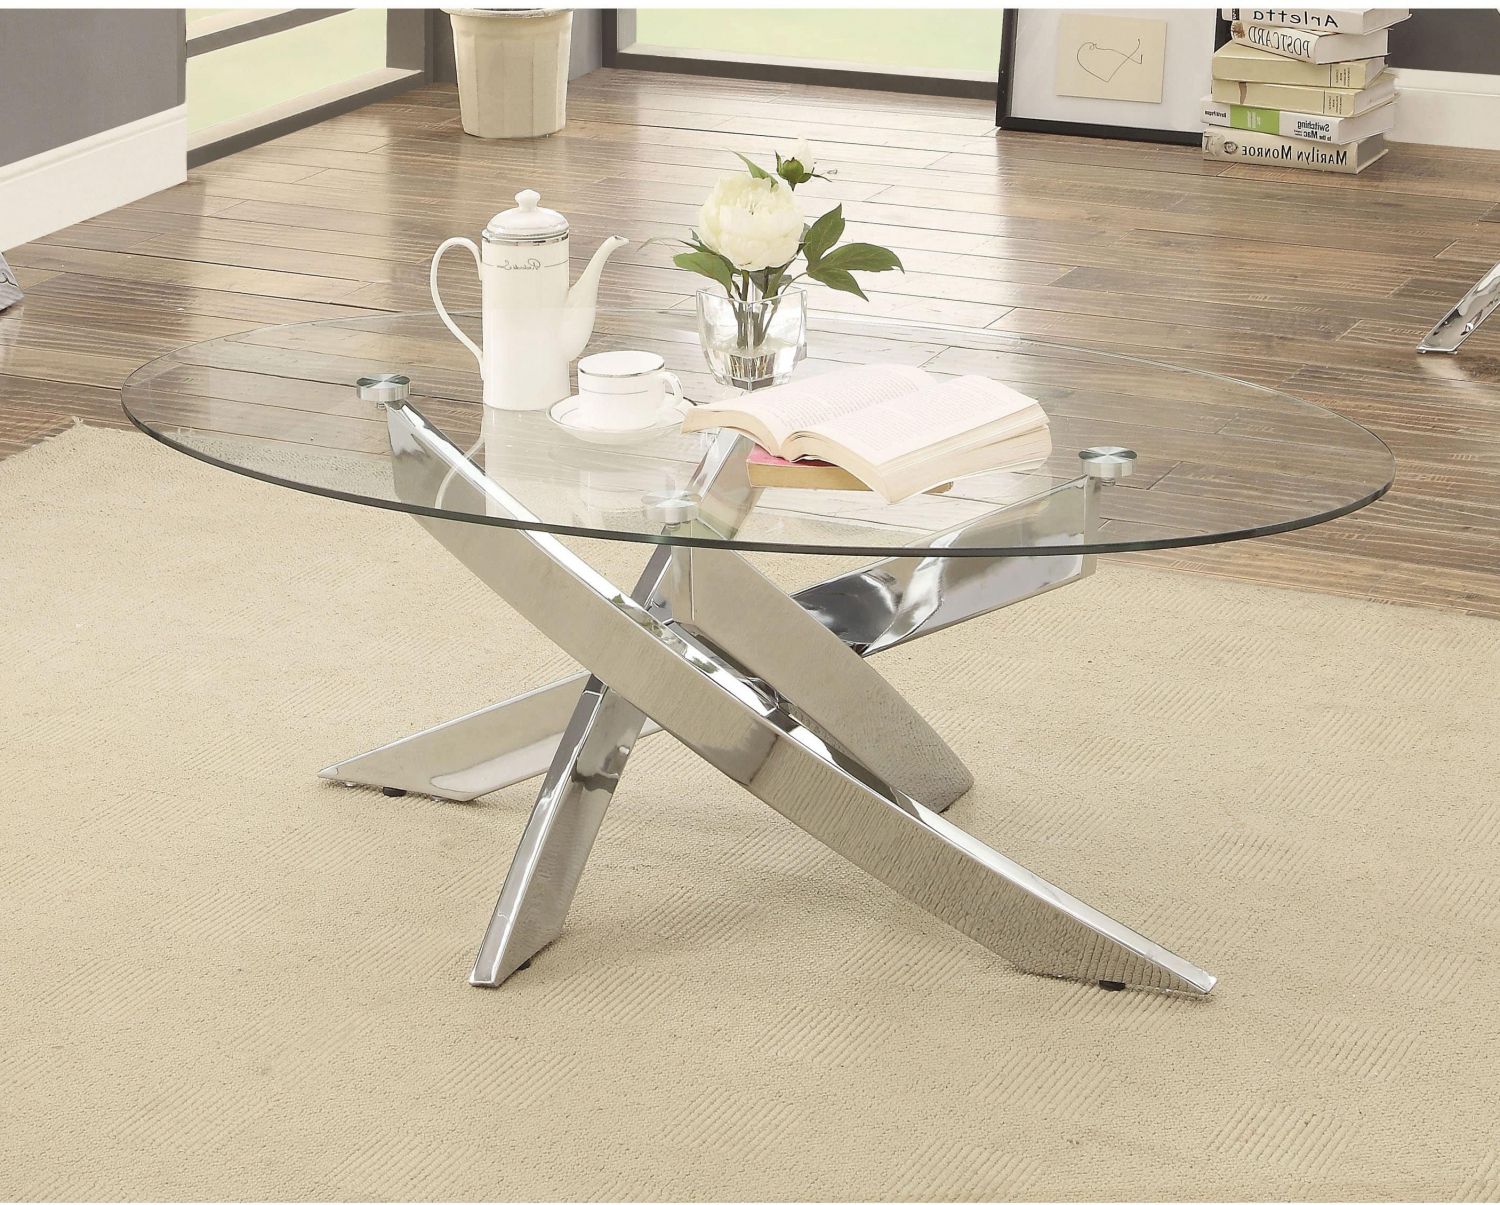 Chrome Coffee Tables Within Most Recently Released Glass, Chrome Oval Coffee Table Shiny Silver Criss Cross Metal Base (View 1 of 10)